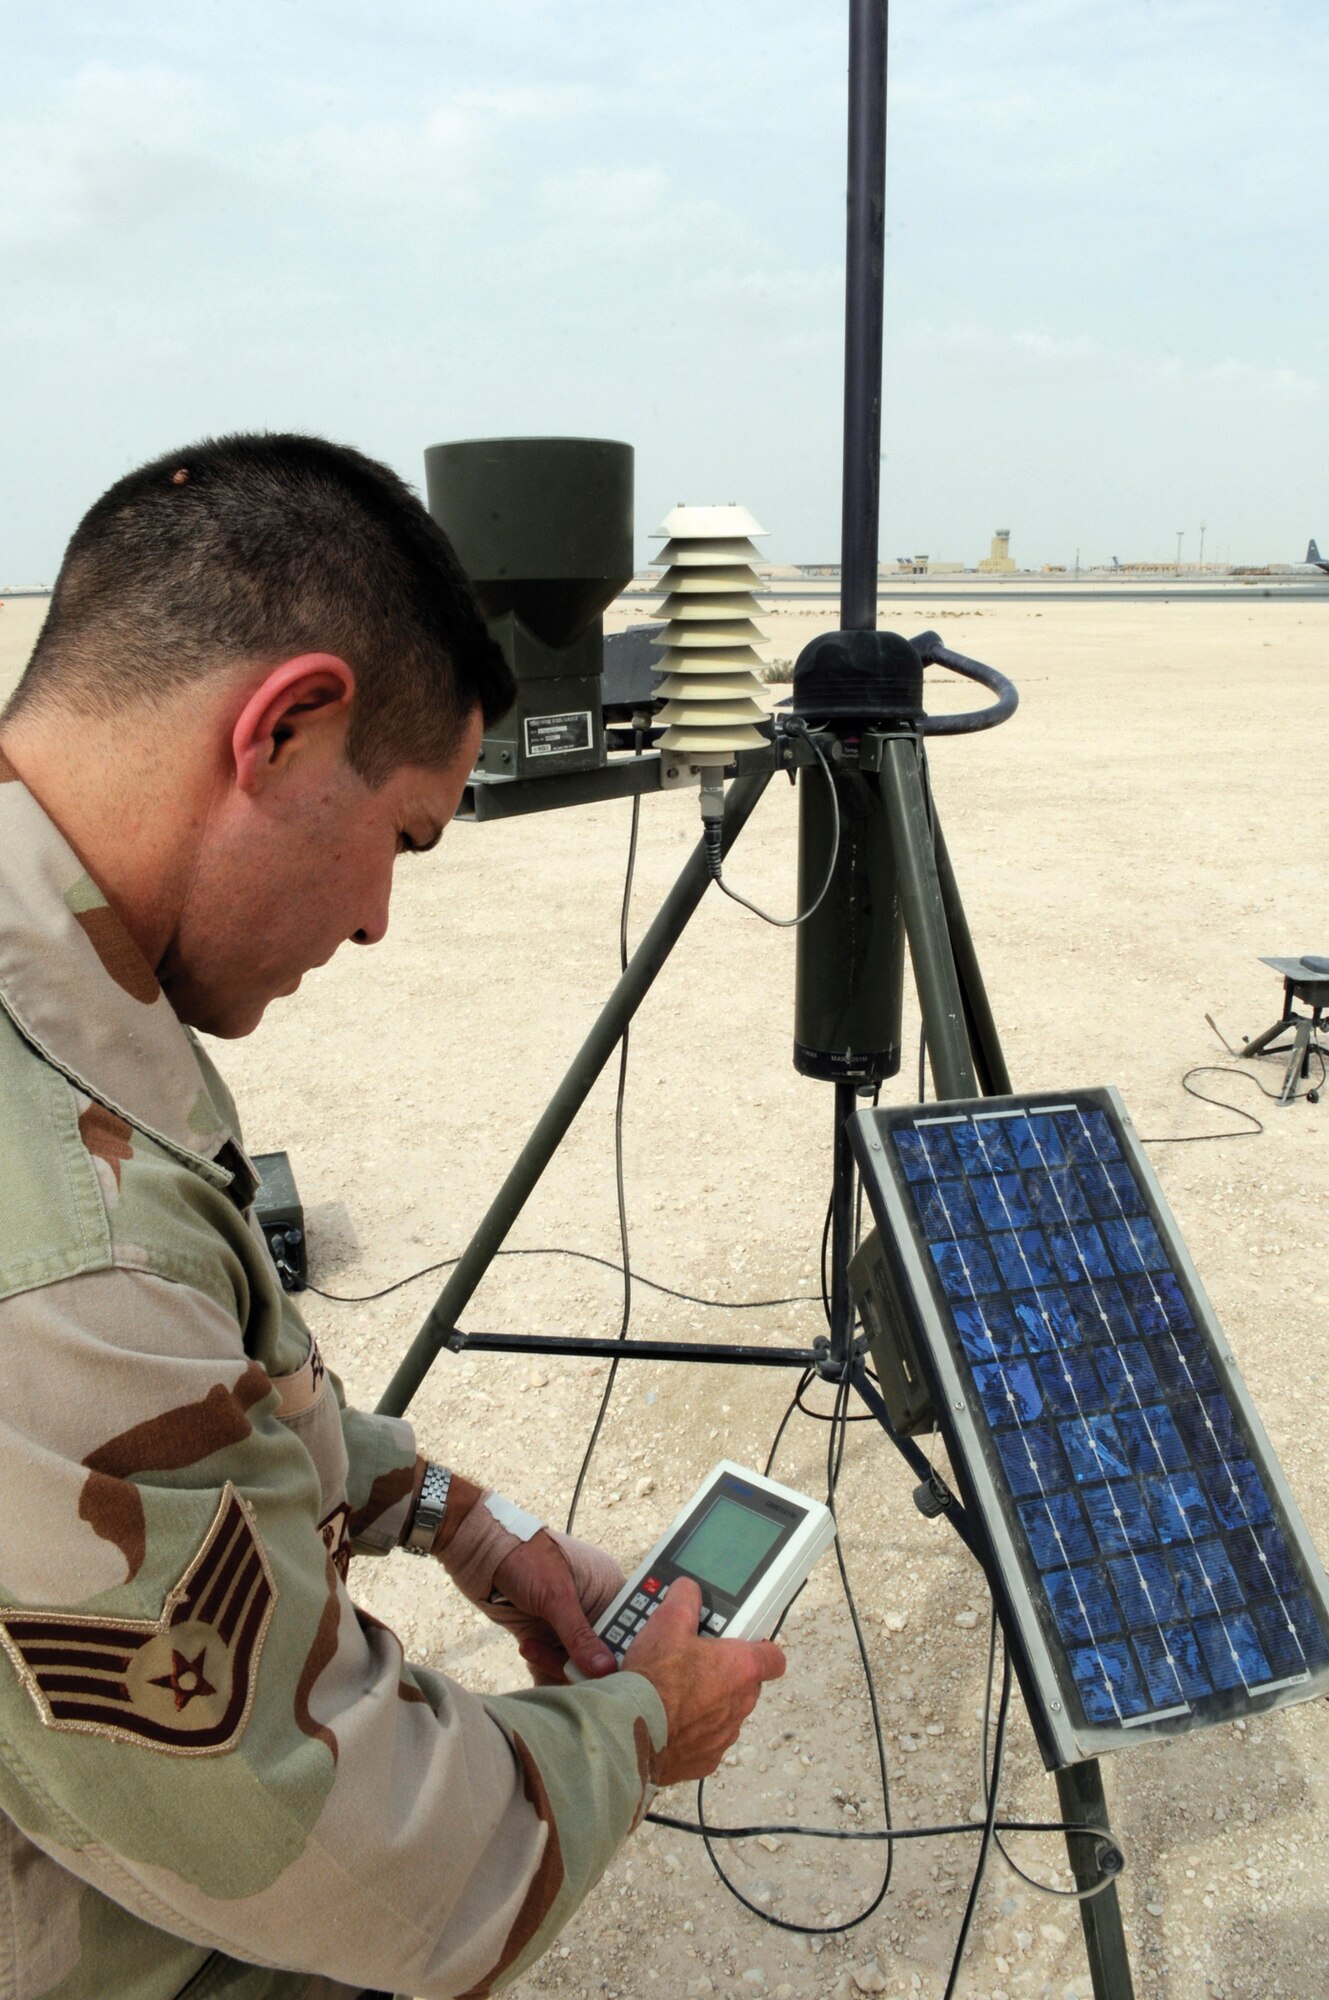 Staff Sgt. Kevin Fedon, weather forecaster assigned to the 379th Expeditionary Operations Support Squadron, checks weather readouts (temperature, wind speed/direction and precipitation) at a remote weather sensor at an undisclosed location in Southwest Asia Nov. 4, 2008. The weather readings are put into a weather model to help predict weather patterns and are used for daily reports to aircrews preparing for missions.  Sergeant Fedon is a native of Lincoln, Neb., and is deployed from the Nebraska Air National Guard out of Offutt Air Force Base, Neb.  (U.S. Air Force photo by Tech. Sgt. Michael Boquette)